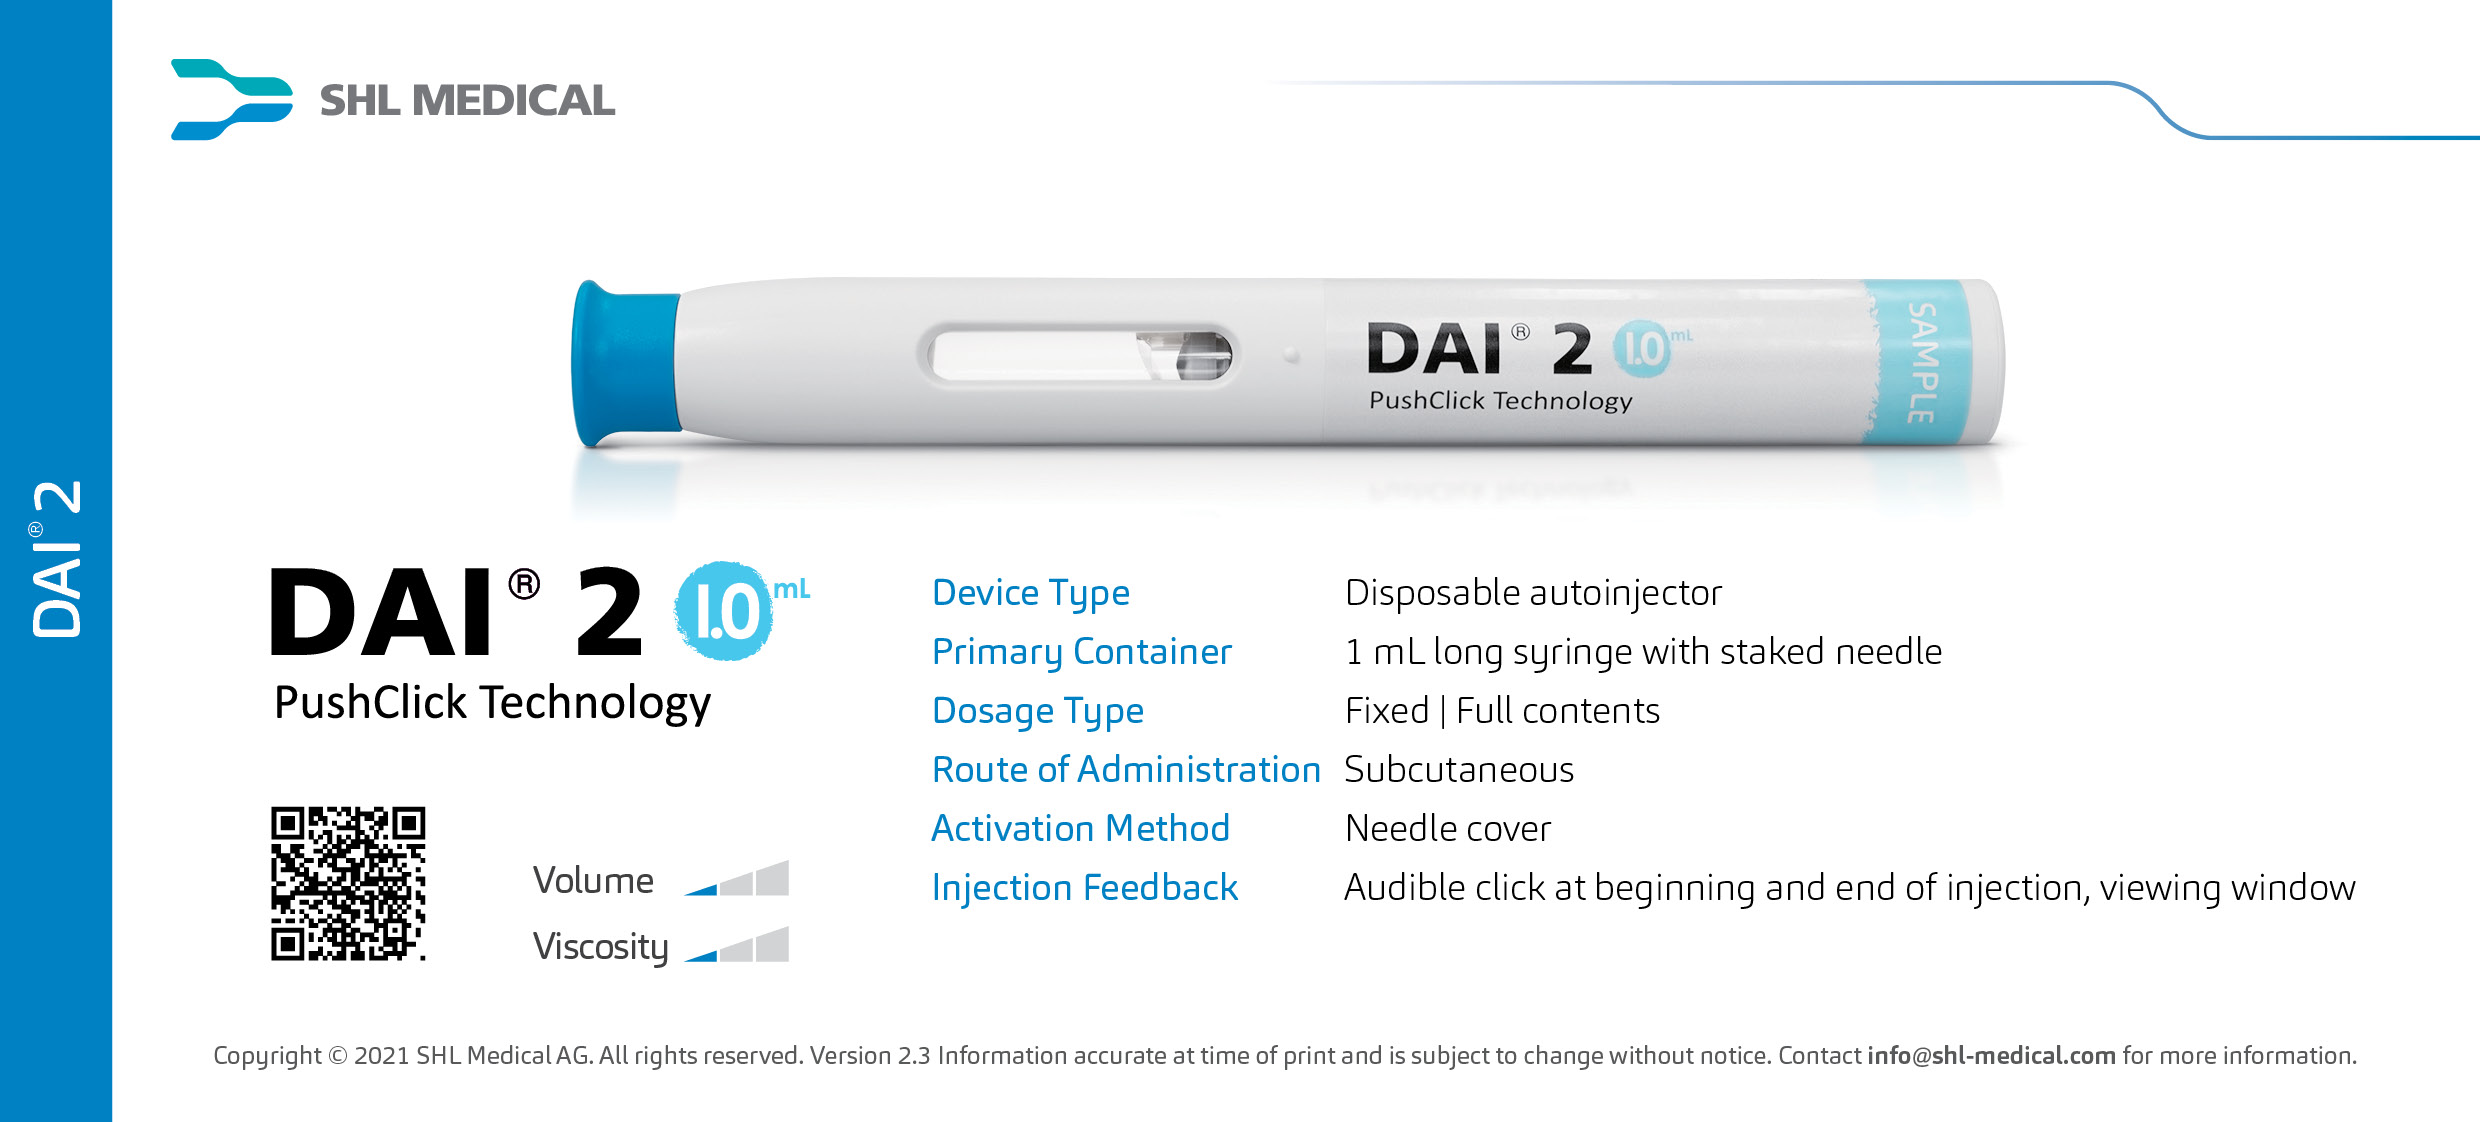 Product card of DAI® 2 two-step, single dose autoinjector with 1 mL fill volume developed by SHL Medical featuring its device specifications and handling instructions